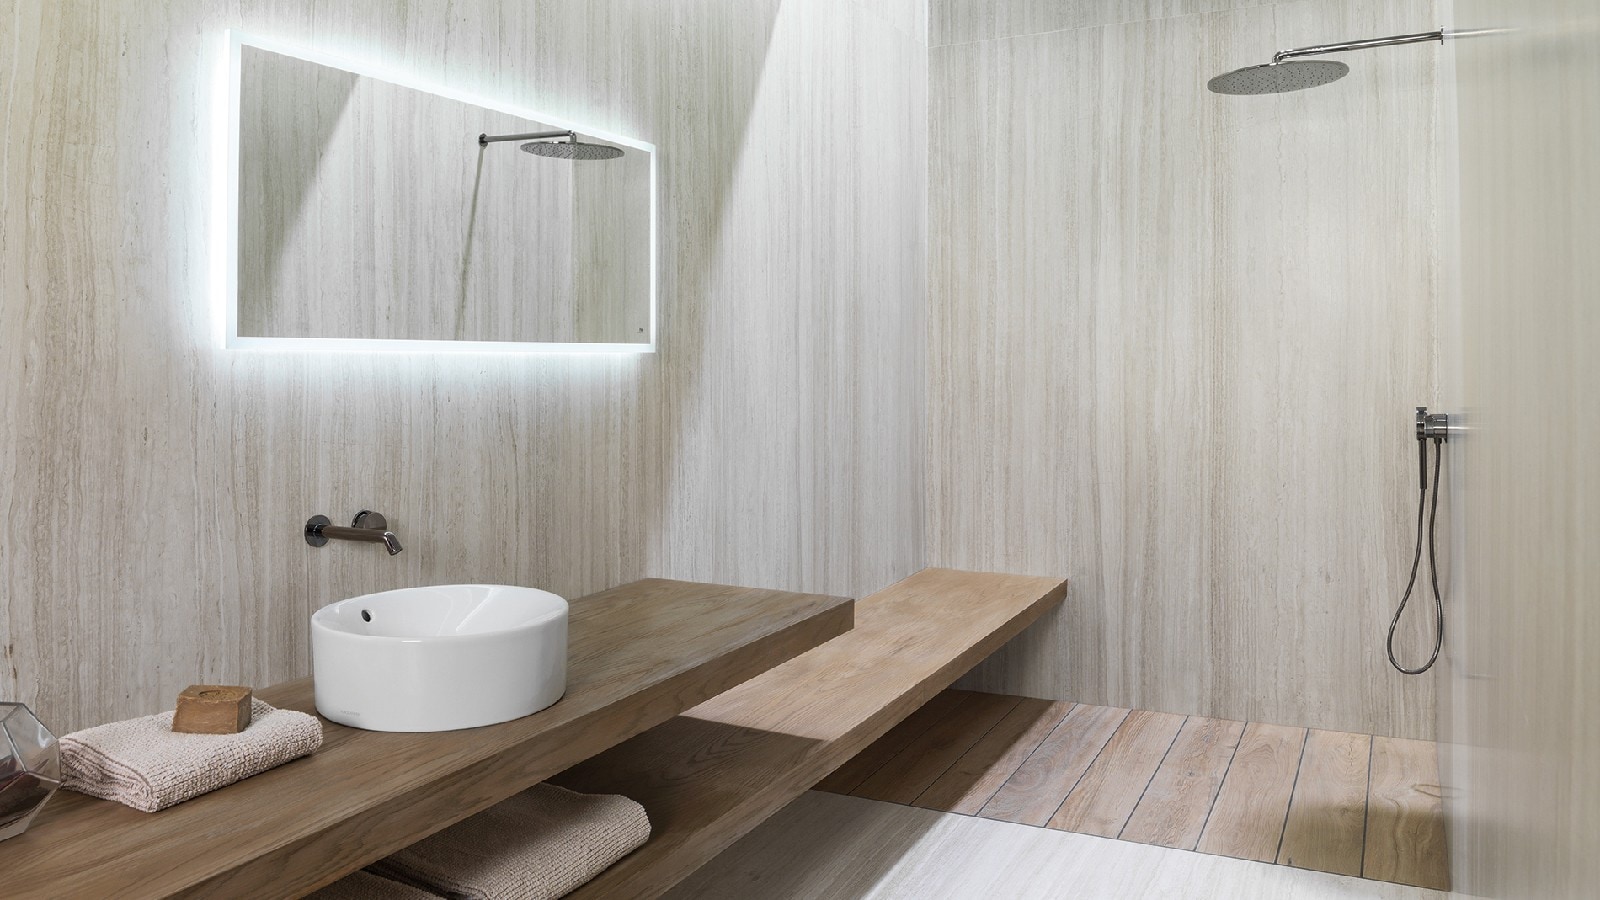 XLIGHT Haven by Urbatek highlights the strength of travertine marble